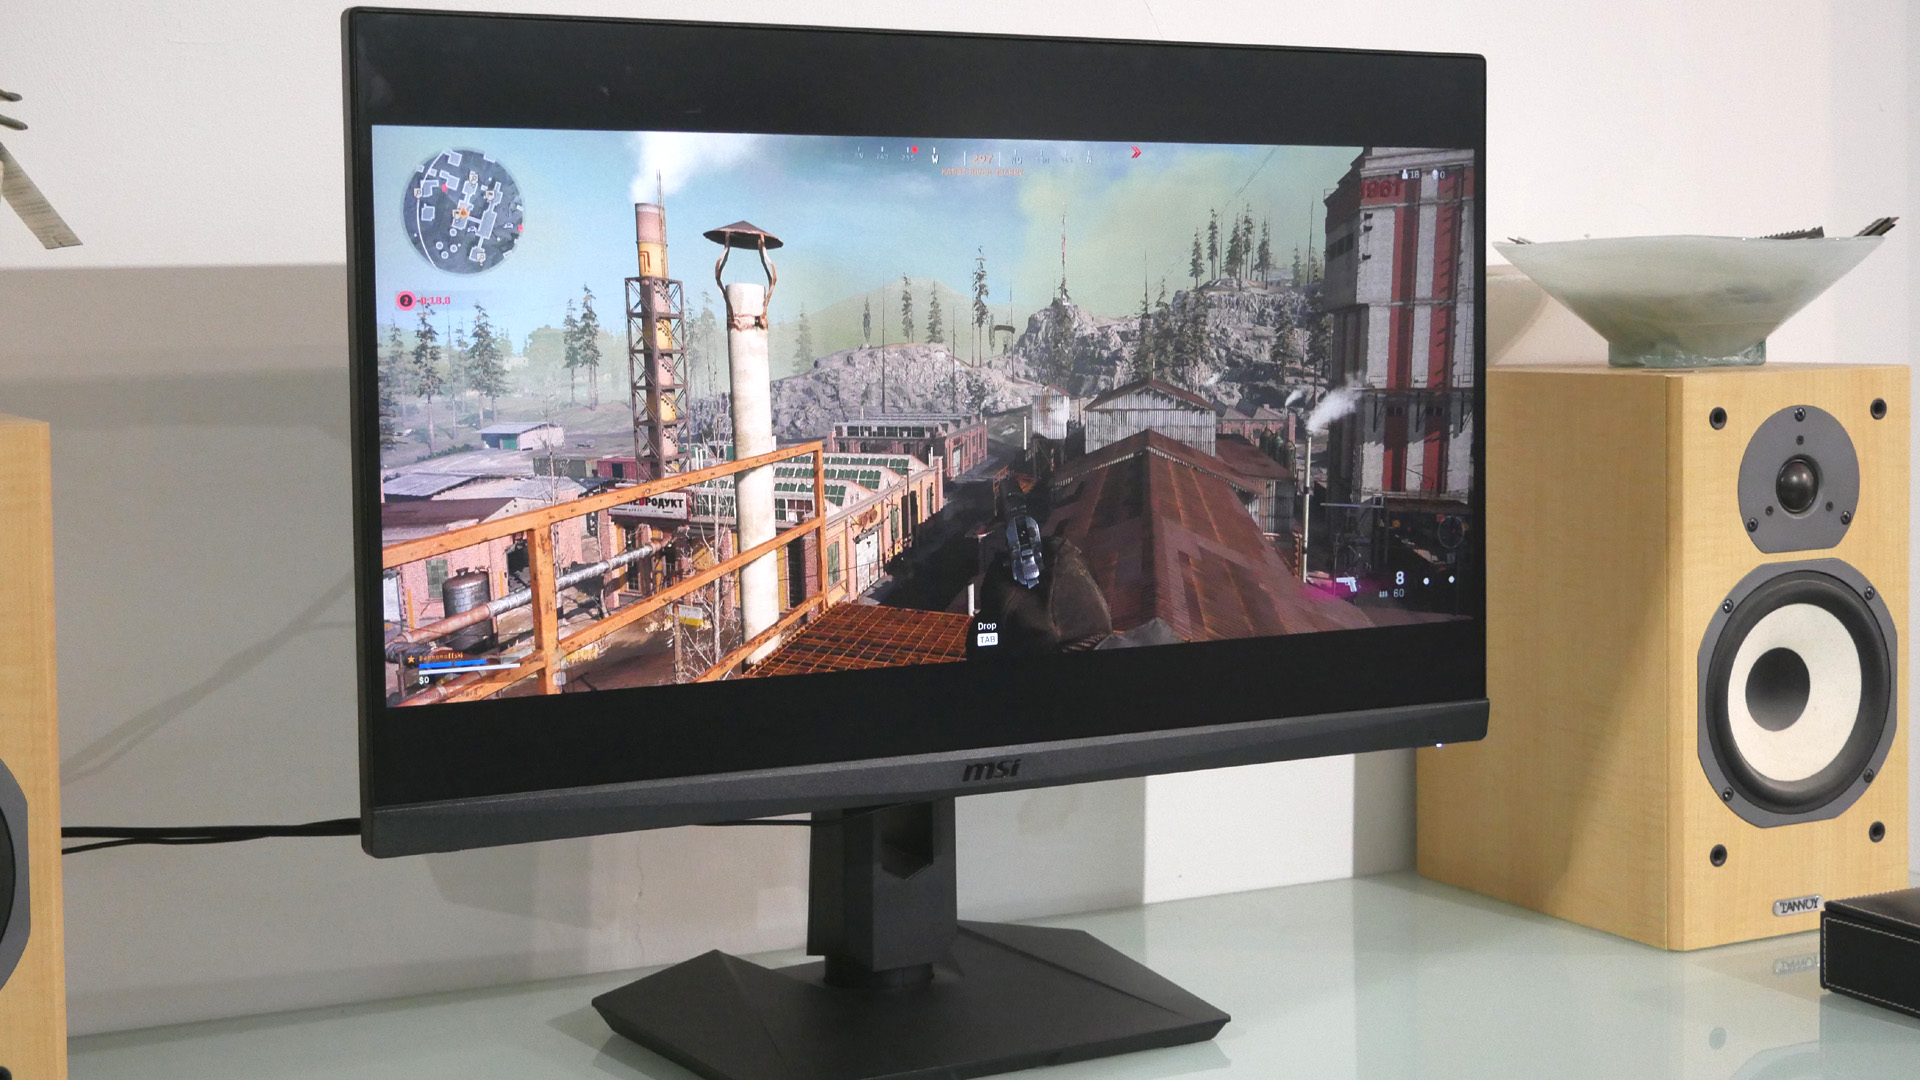 1080p vs 1440p: What’s the best value gaming monitor resolution in 2022?